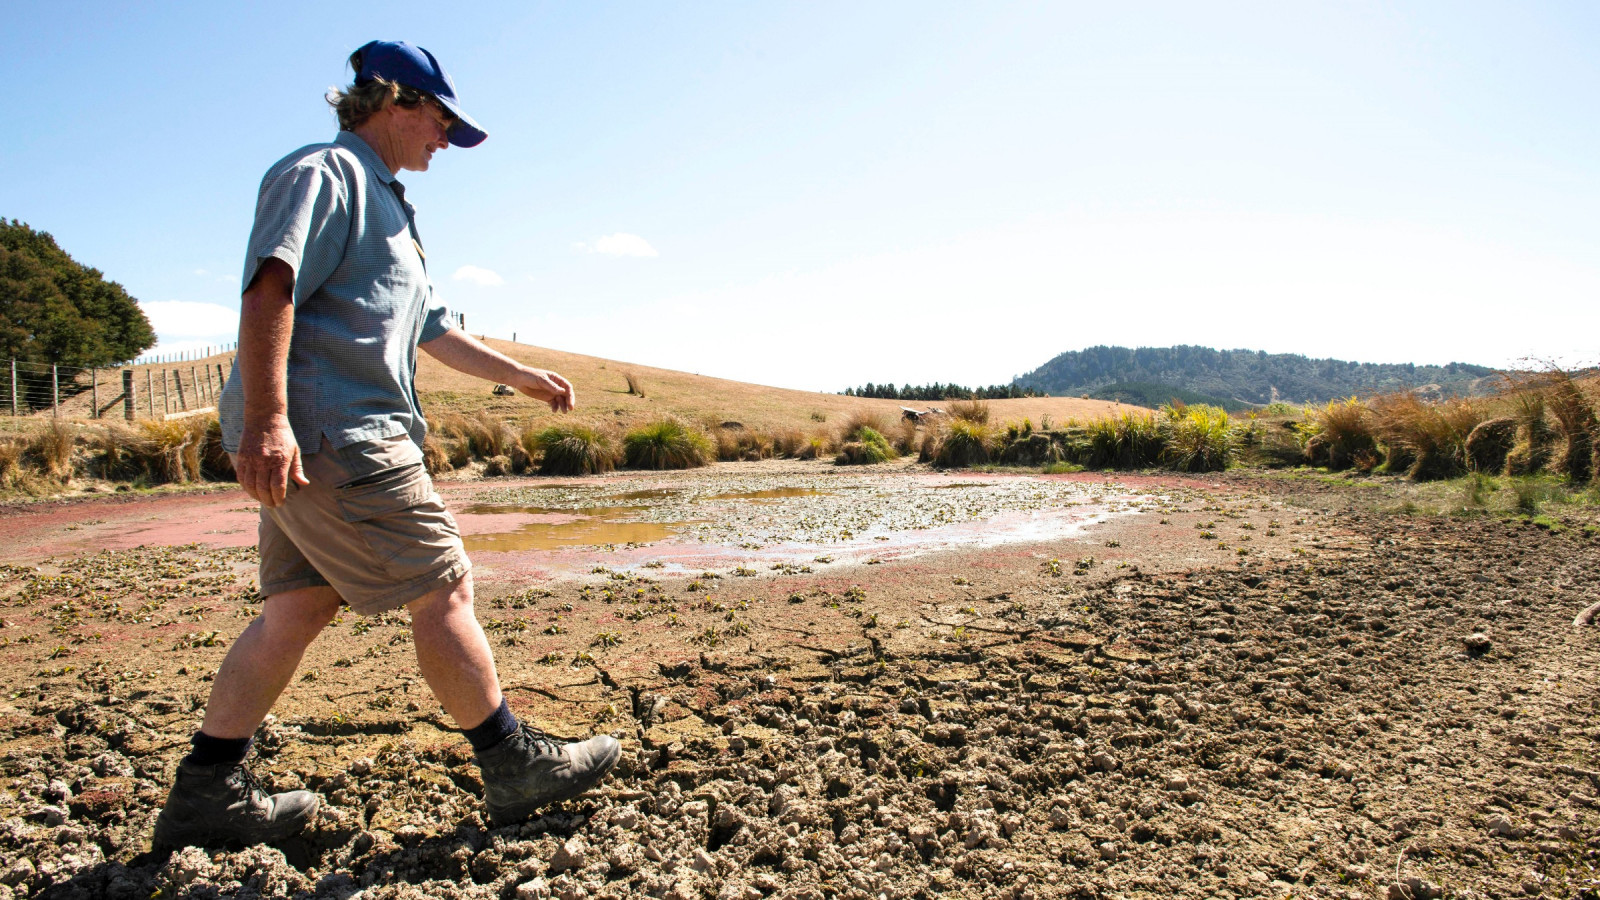 A person wearing a cap, shorts and boots walks over a dried-out lake bottom. Some shallow water remains, which contains green algae.